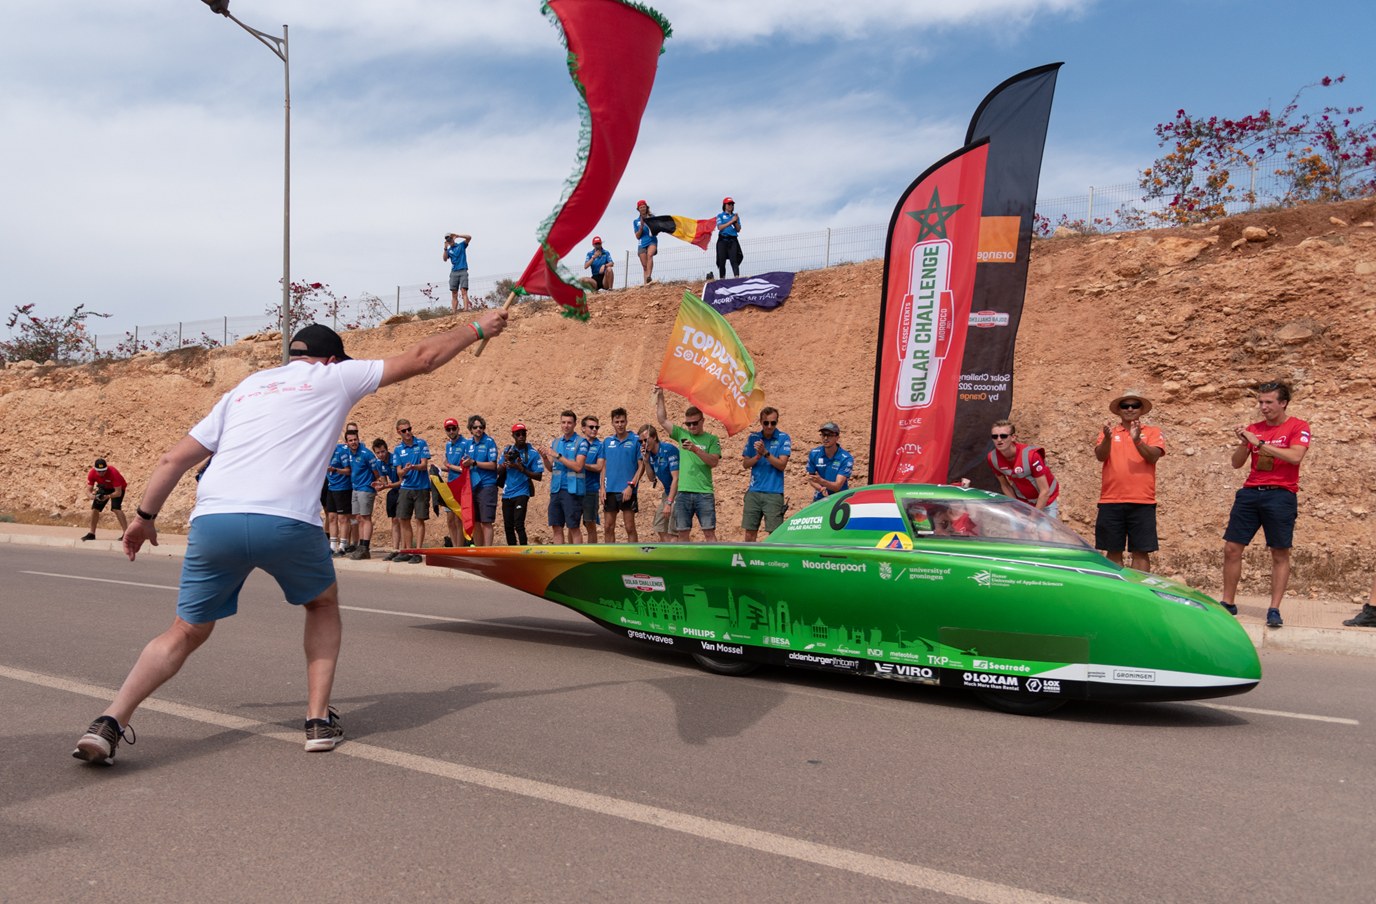 The solar car of Top Dutch Solar Racing during the Solar Challenge in Morocco